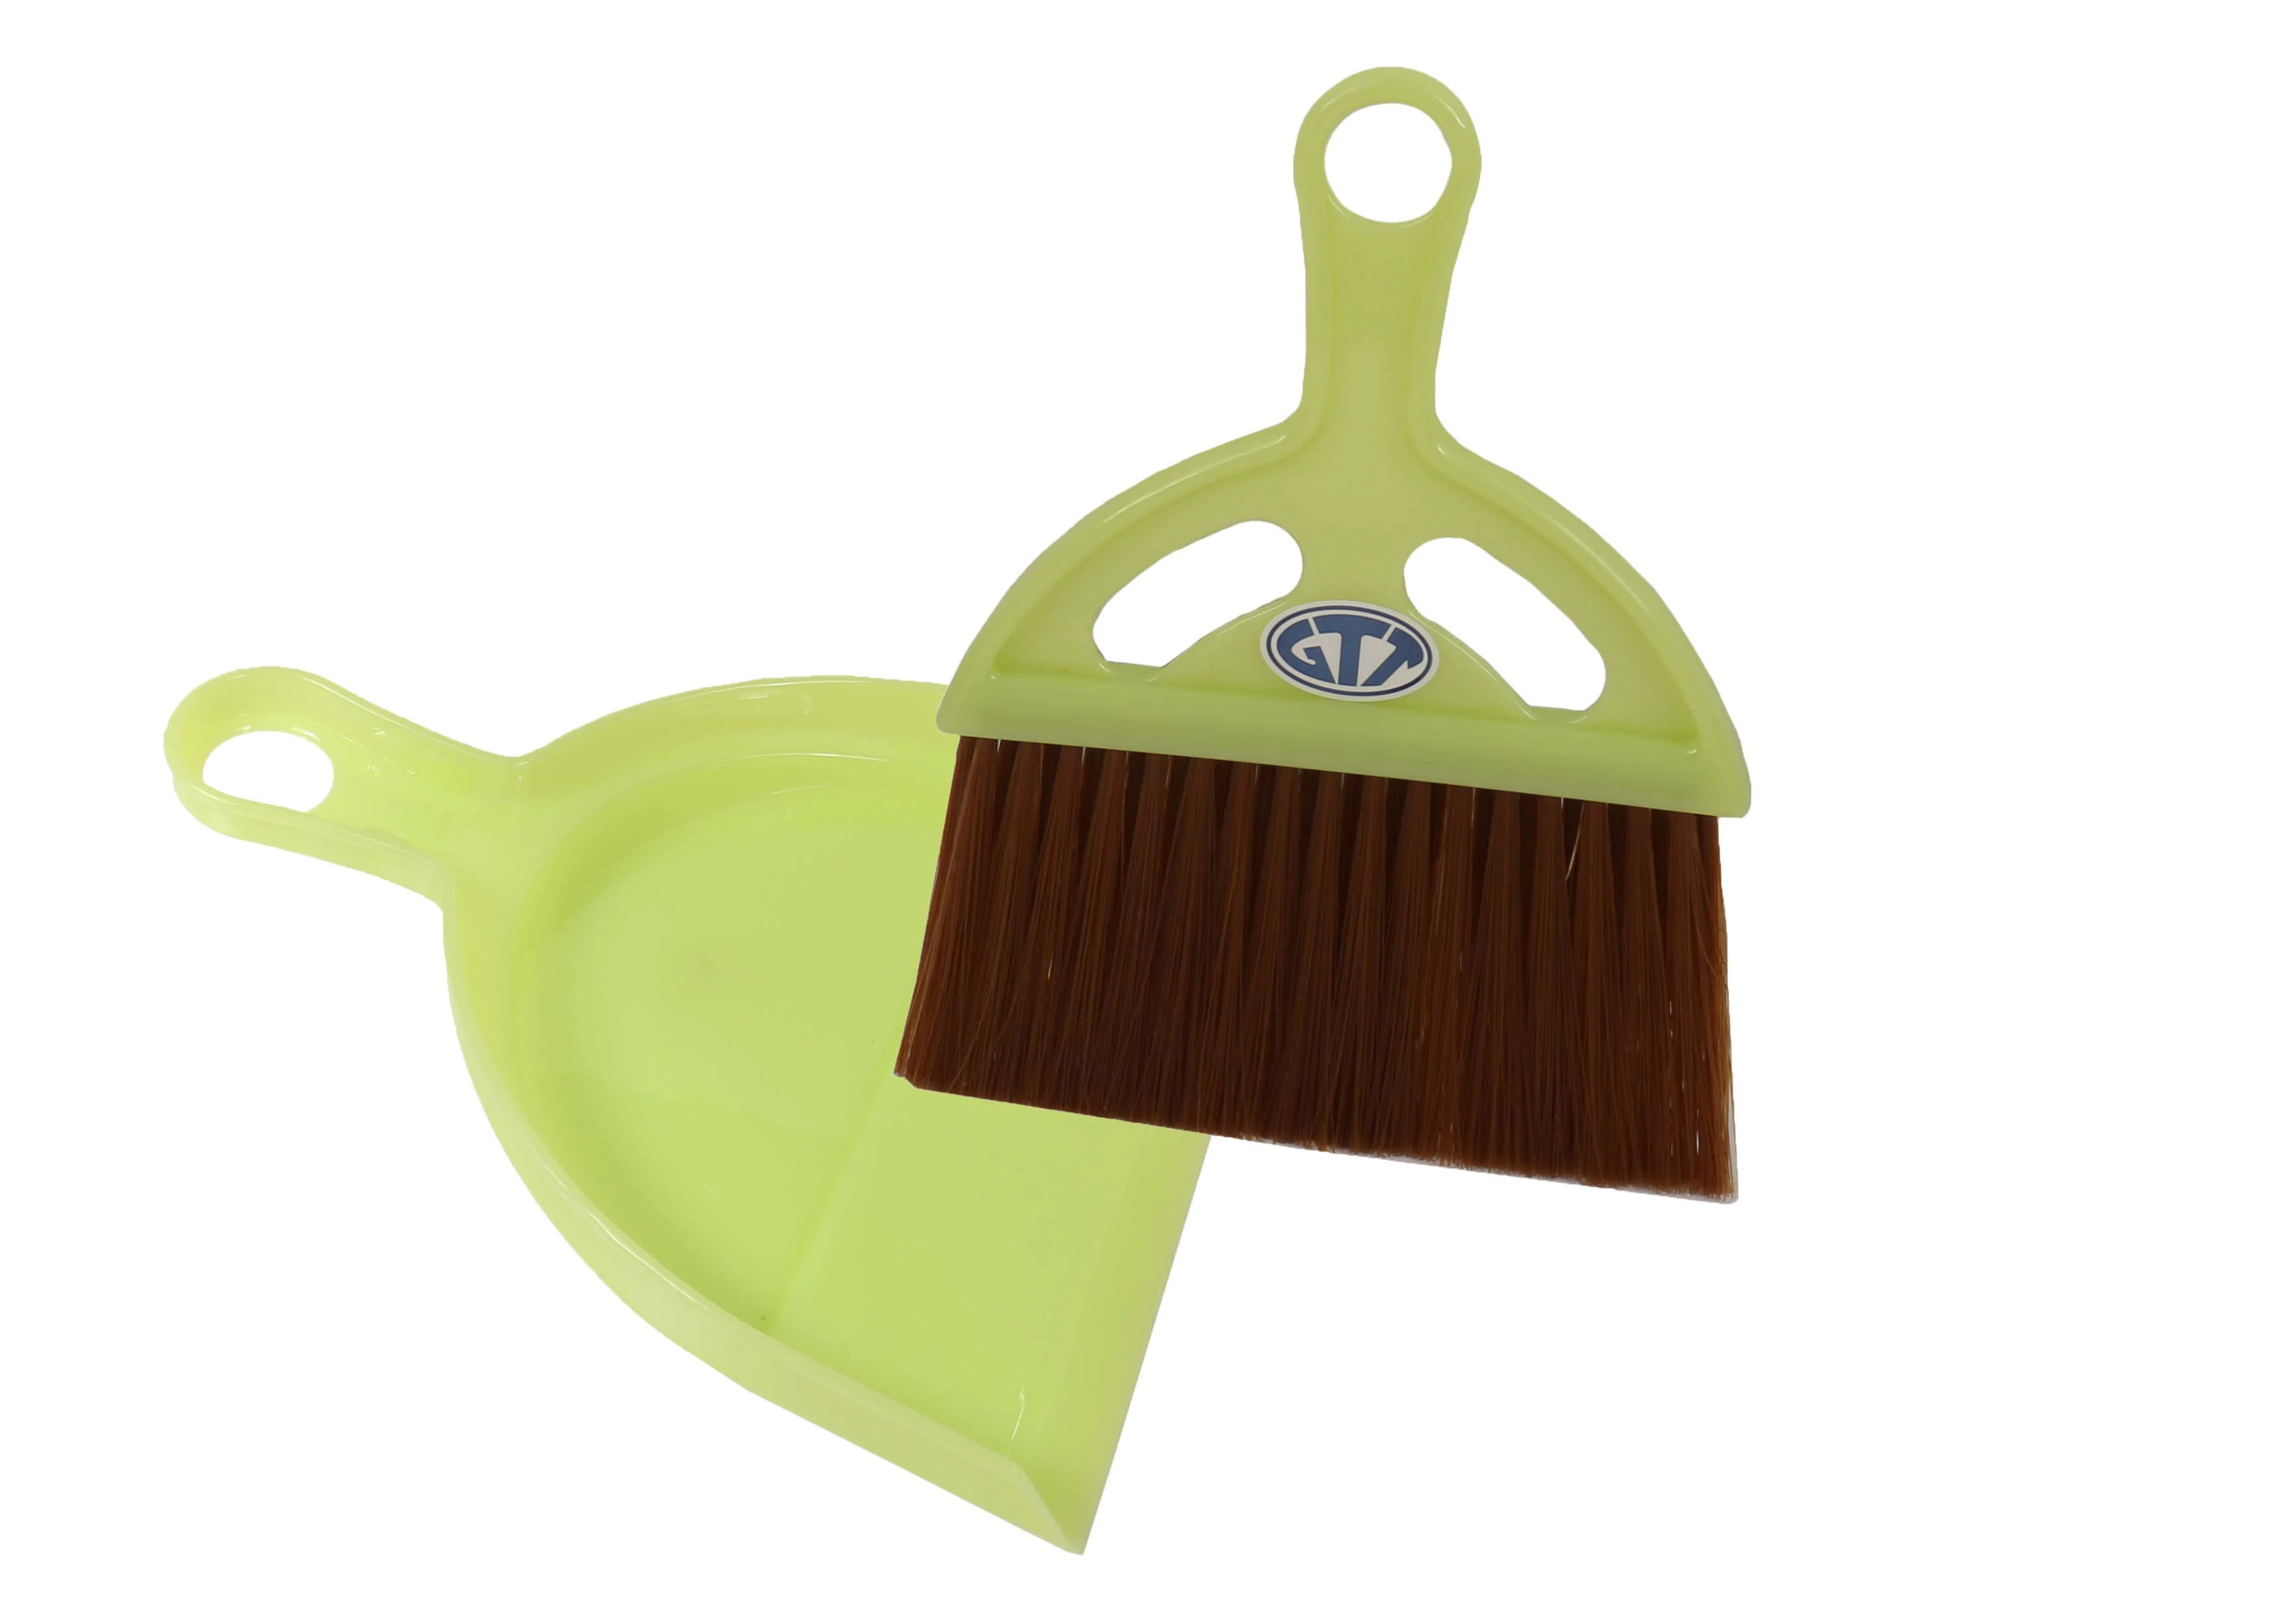 GTT HIGH QUALITY MINI DUSTPAN WITH BRUSH SET SUITABLE FOR HOME AND CAR CLEANING MADE IN TAIWAN ALT-29339